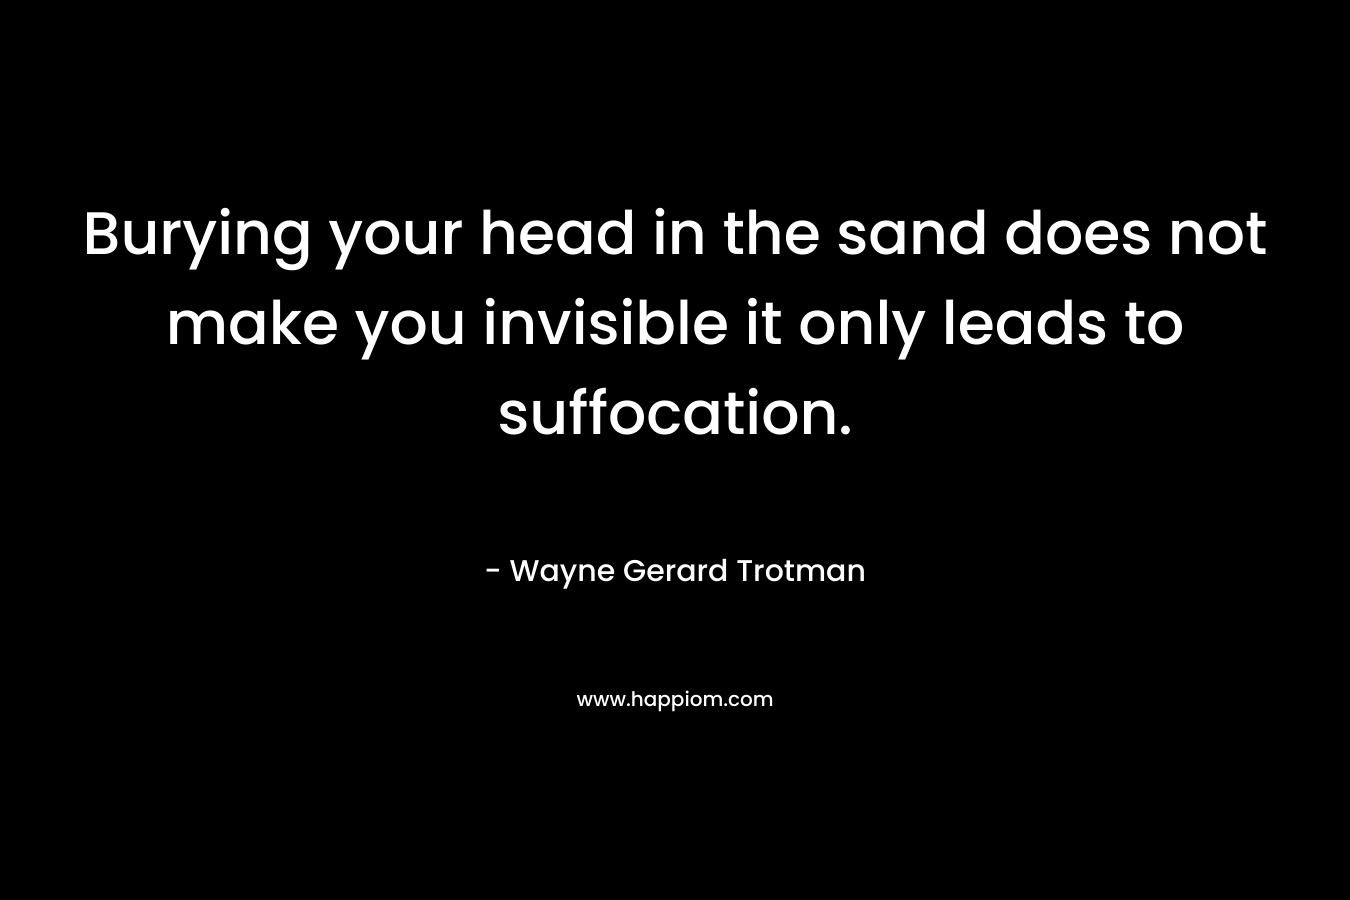 Burying your head in the sand does not make you invisible it only leads to suffocation. – Wayne Gerard Trotman